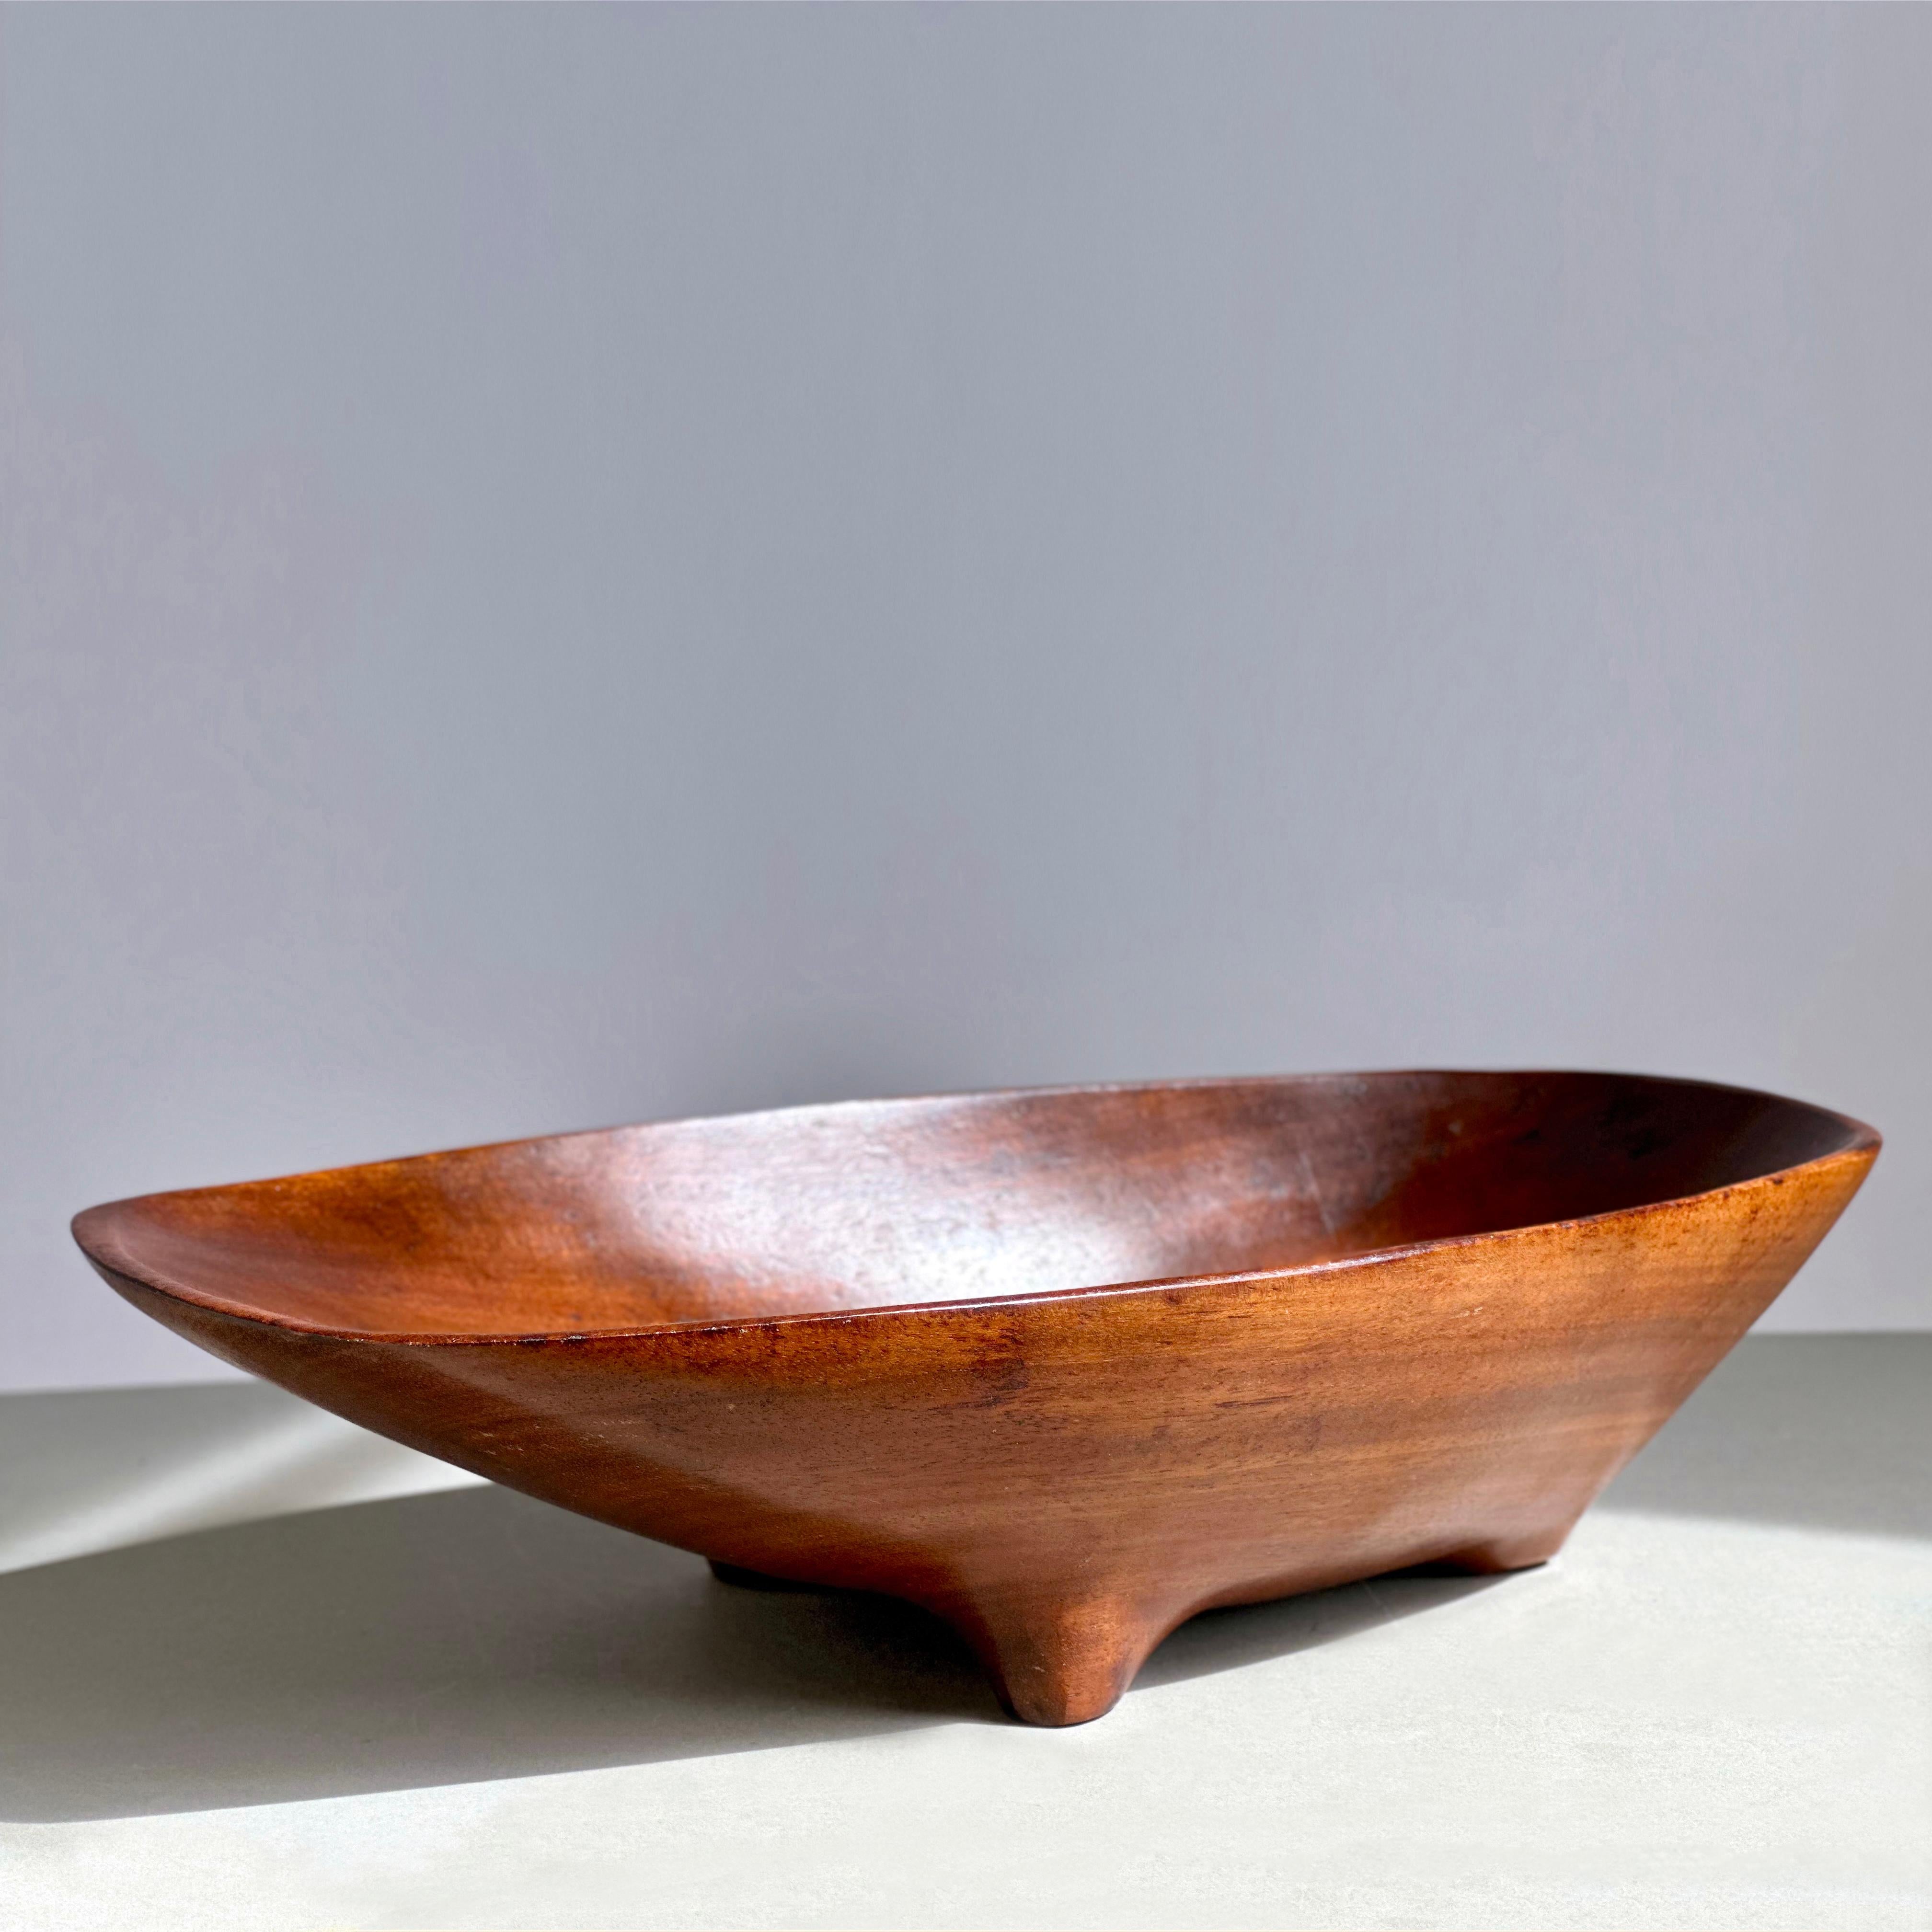 A tri-footed Mask Bowl in hand-carved bissilon by Emil Milan. This design, whose underside appears as a tribal mask, was one of several conceived by Milan and Joyce Anderson for the 1964 USAID (Agency for International Development) project they